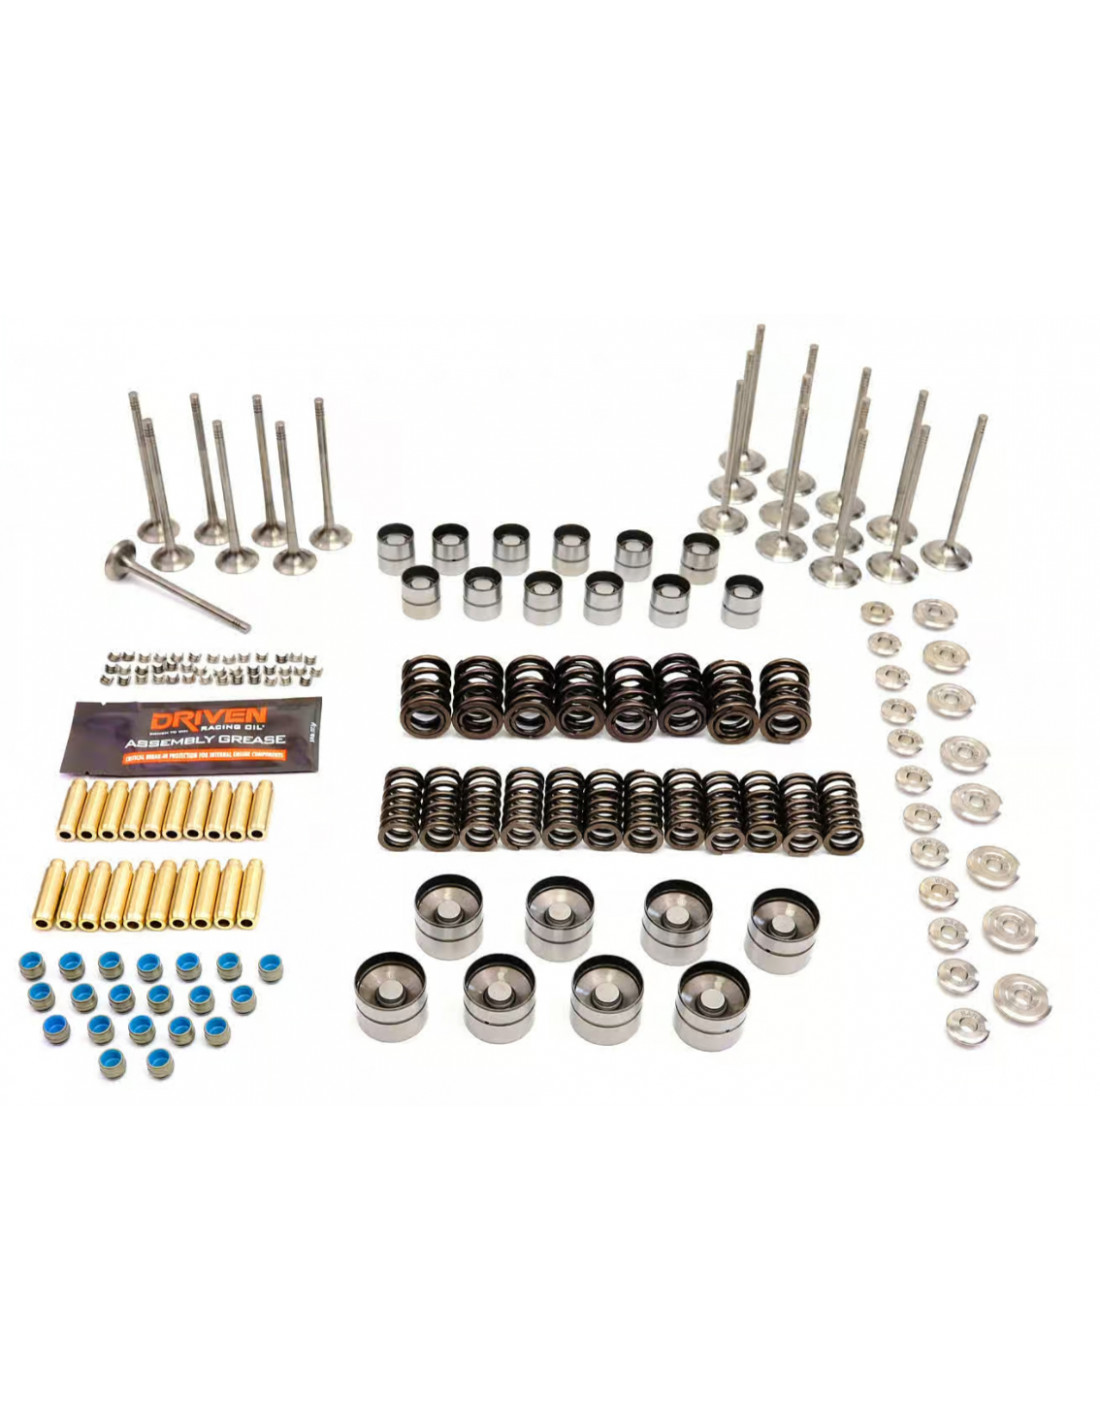 Ultimate High BOOST cylinder head kit, valves, springs, reinforced guide  cups, for 1.8 Turbo 20VT Audi A3 S3 8L TT 8N Golf engin